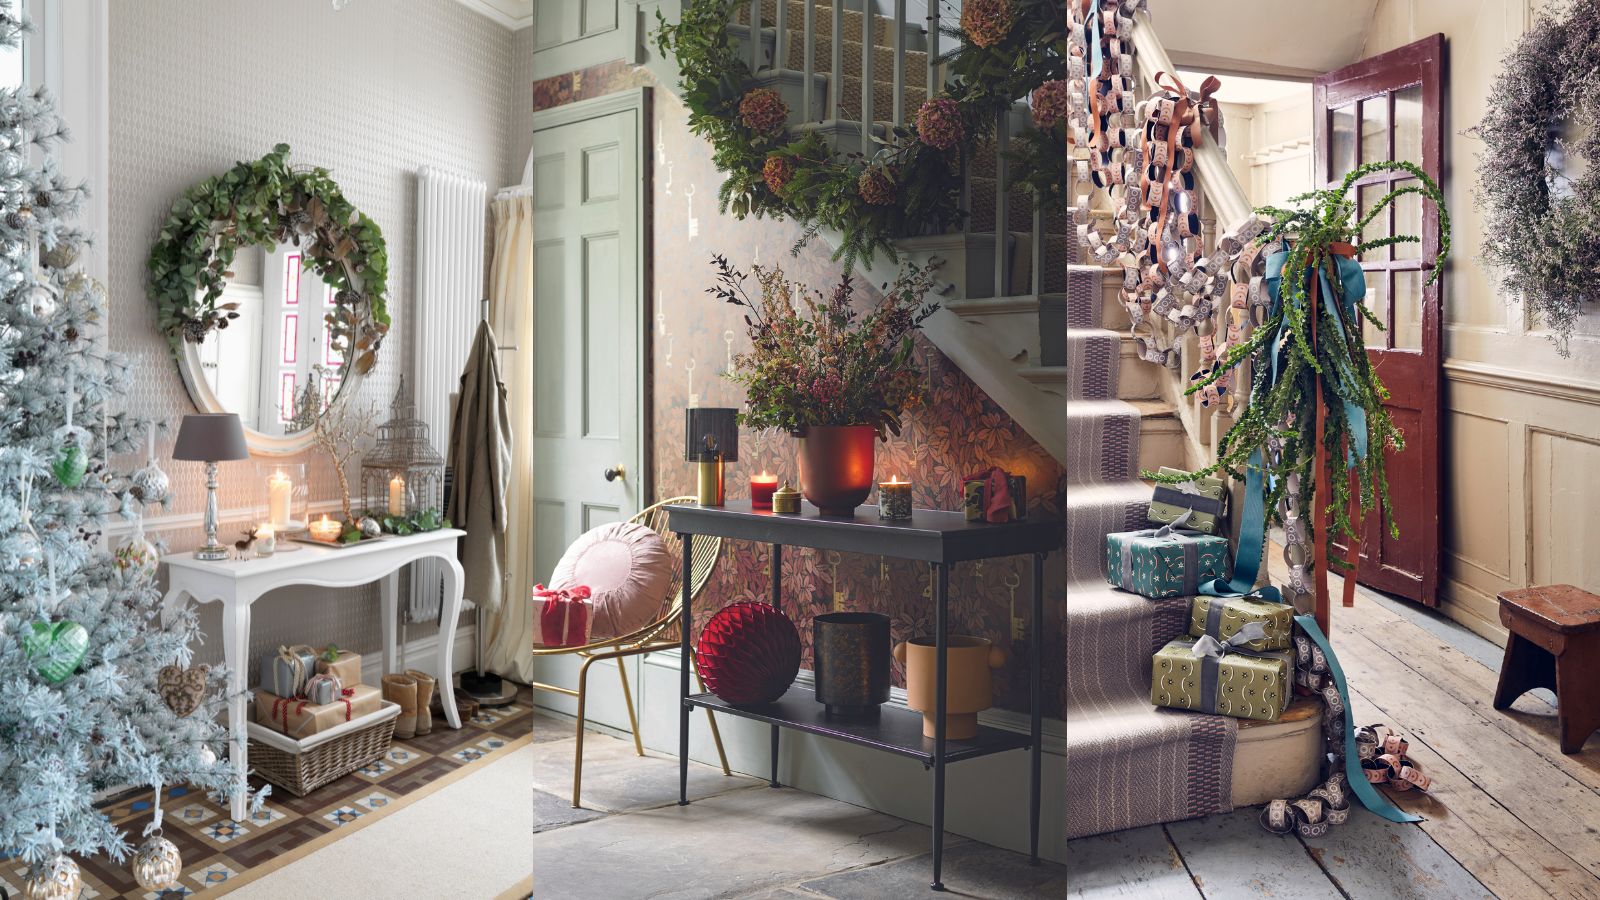 Christmas Hallway Decorations: 20 Ideas For Entryways And More |